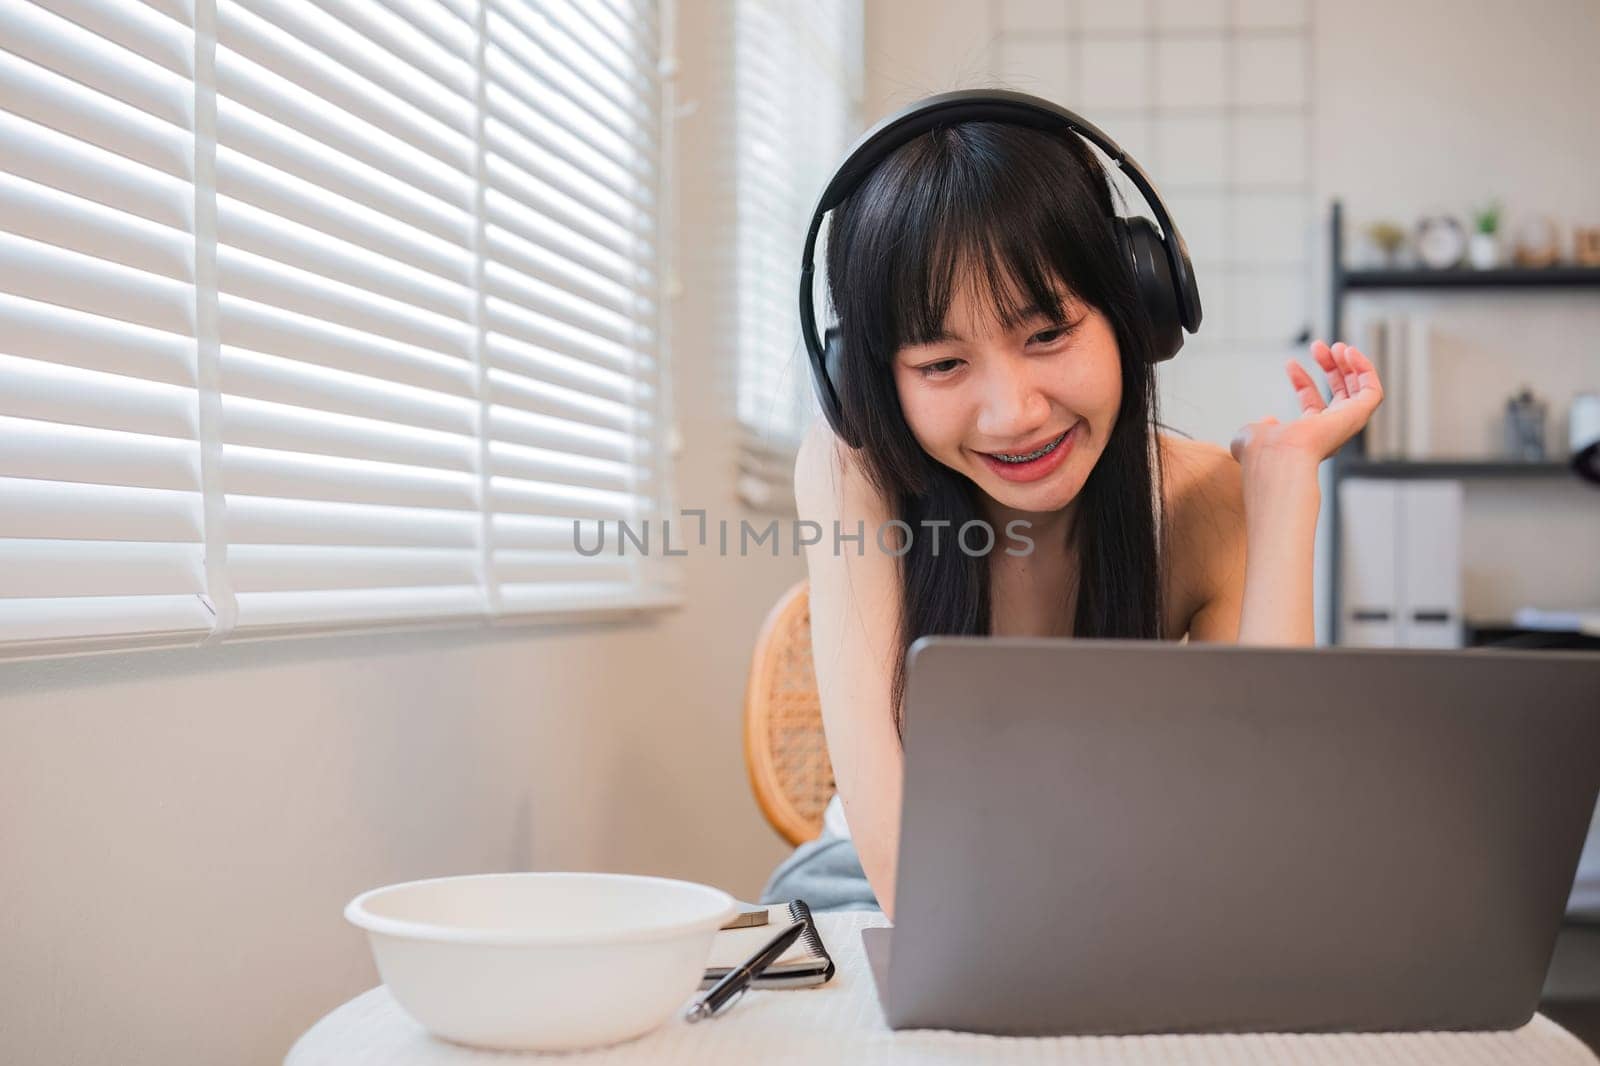 A woman is sitting at a table with a laptop and a bowl of food. She is wearing headphones and she is smiling. The scene suggests a casual and relaxed atmosphere